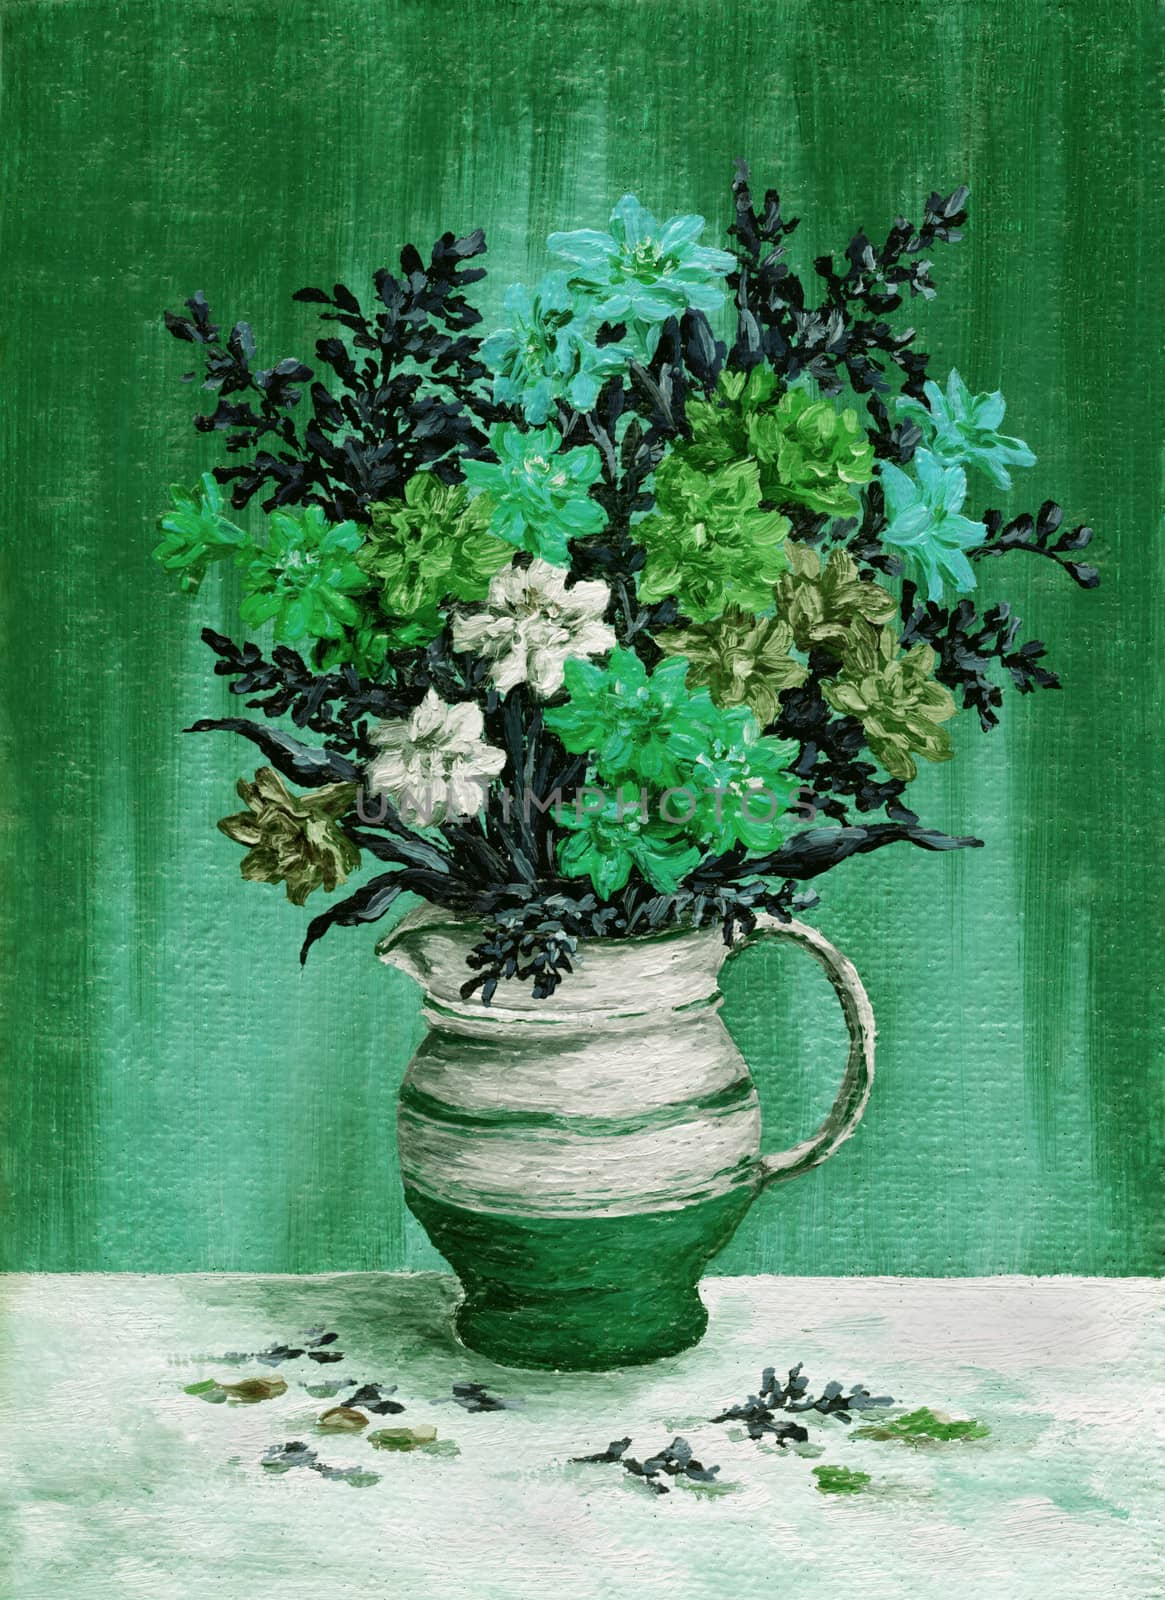 Picture, painting oil paints on a canvas, a bouquet of freesia flowers in a jug